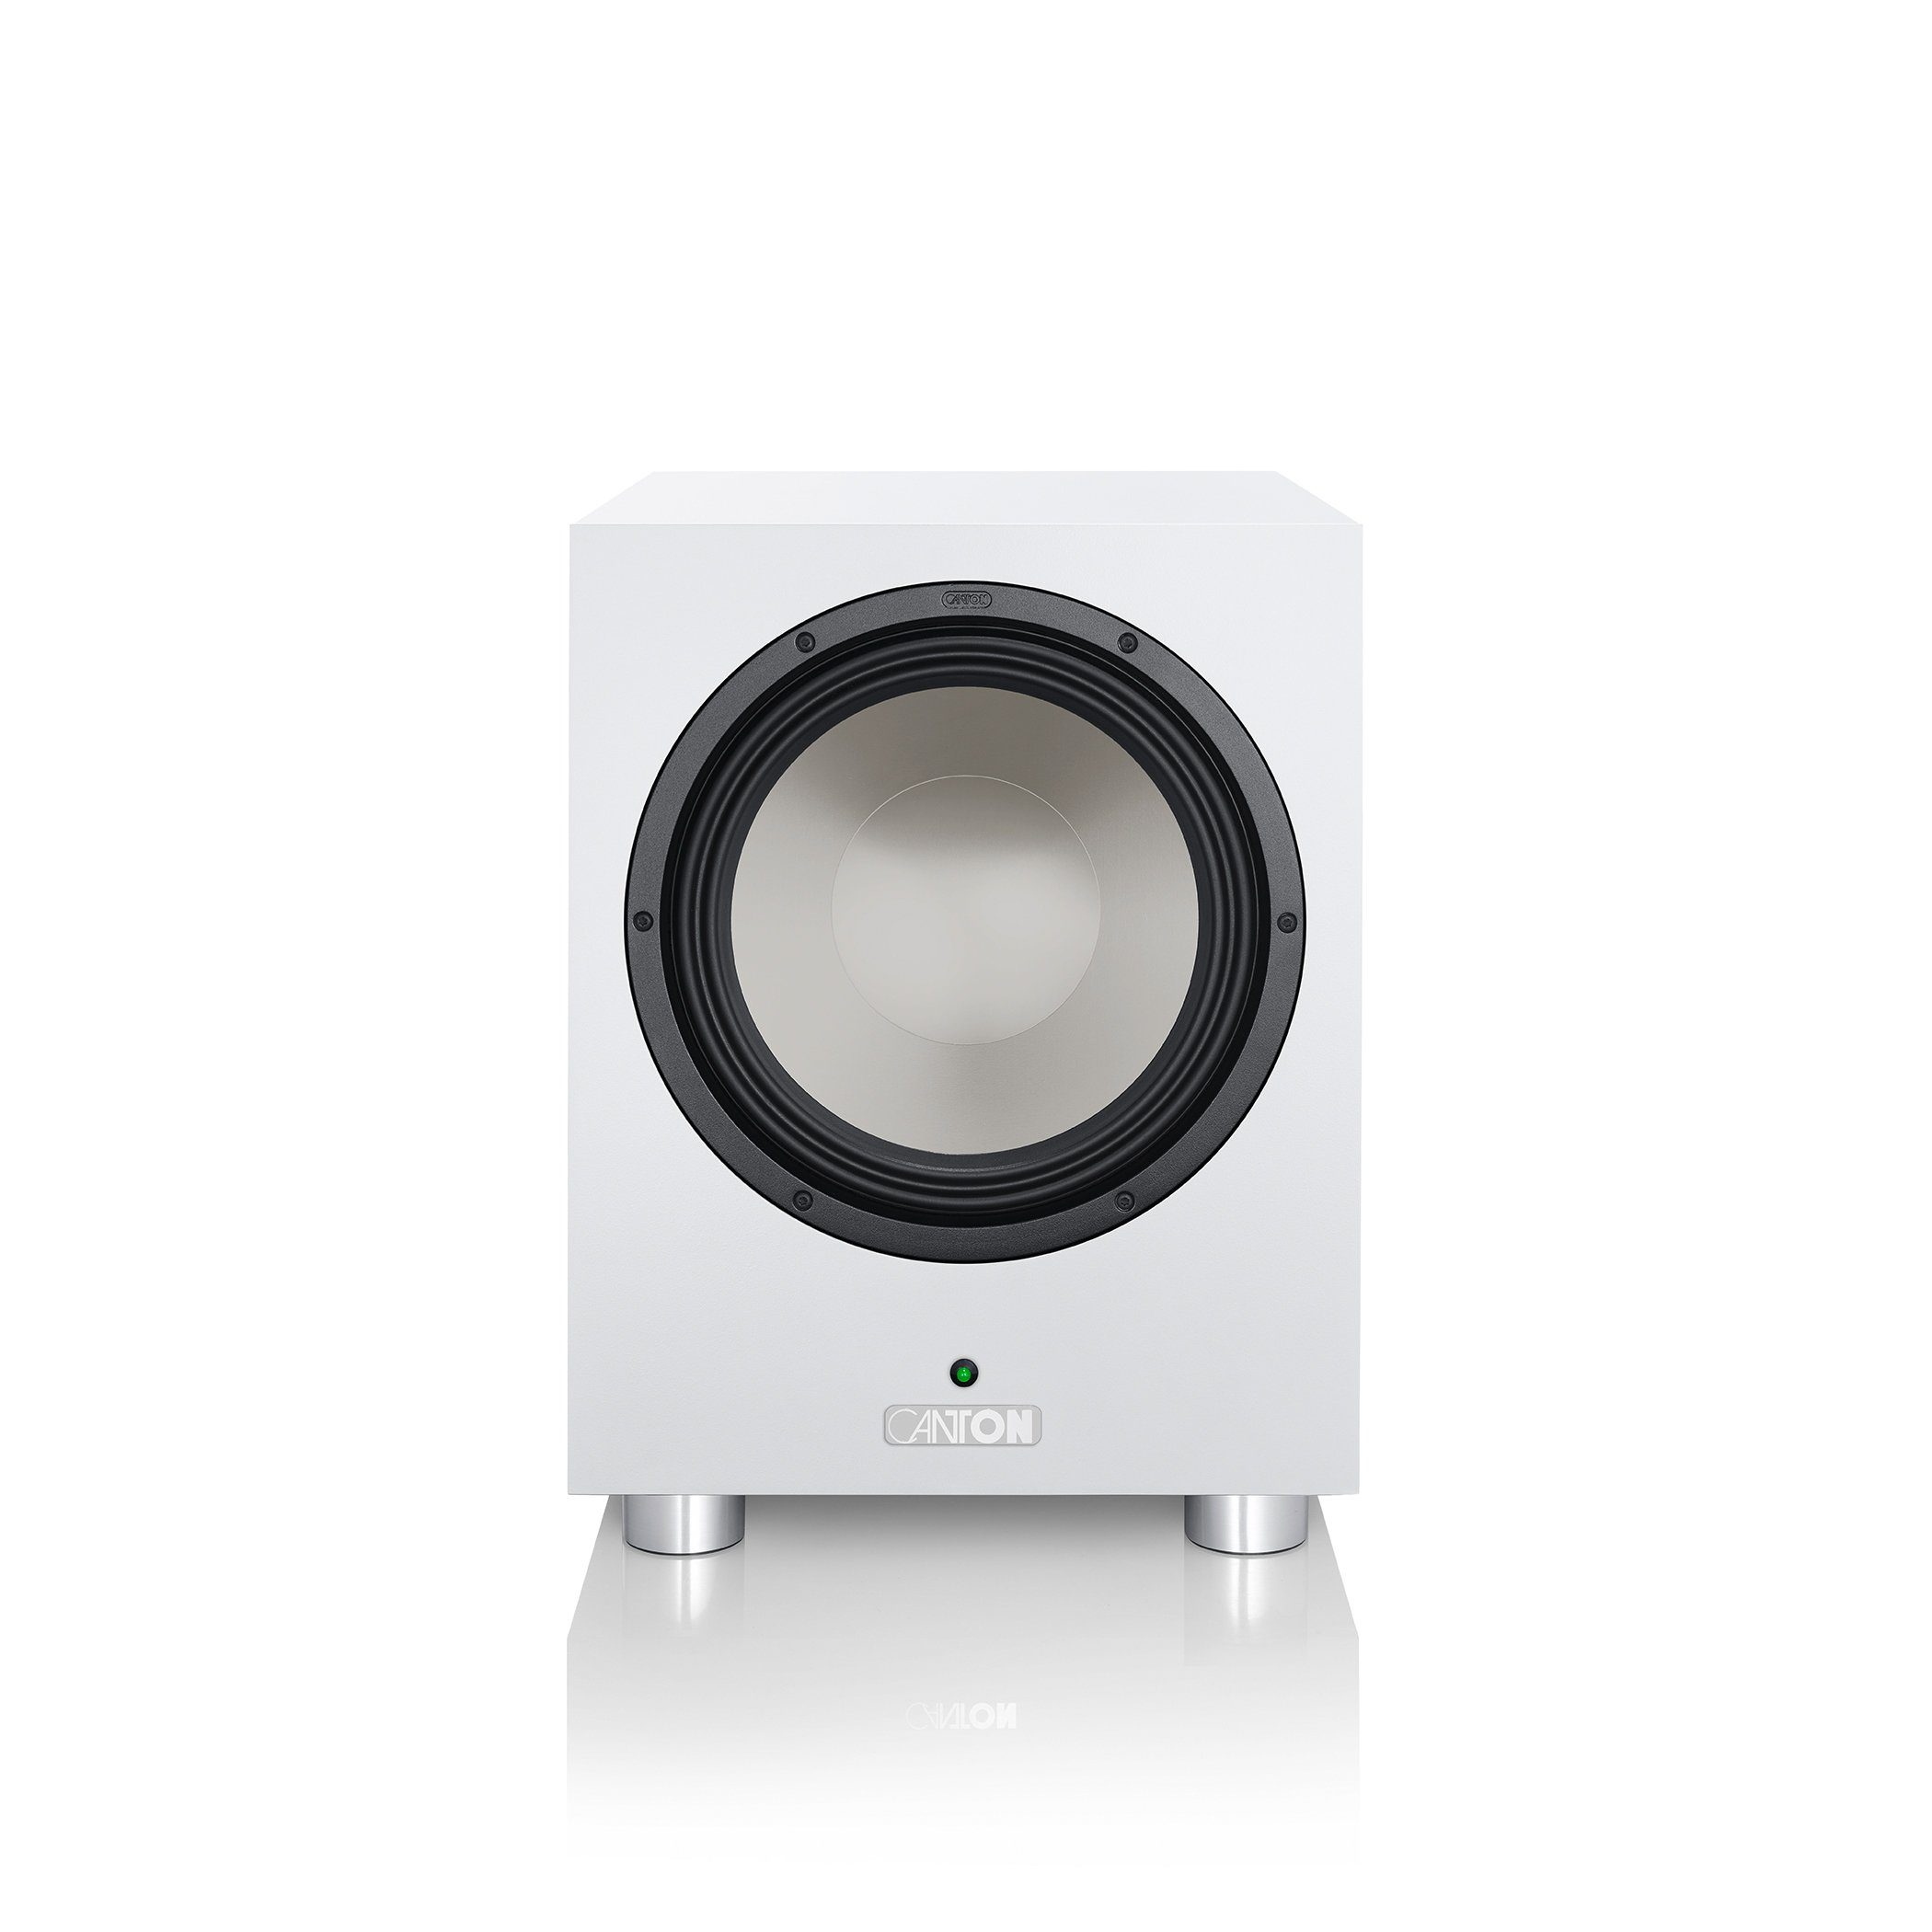 Sub weiss Power 8 Subwoofer CANTON